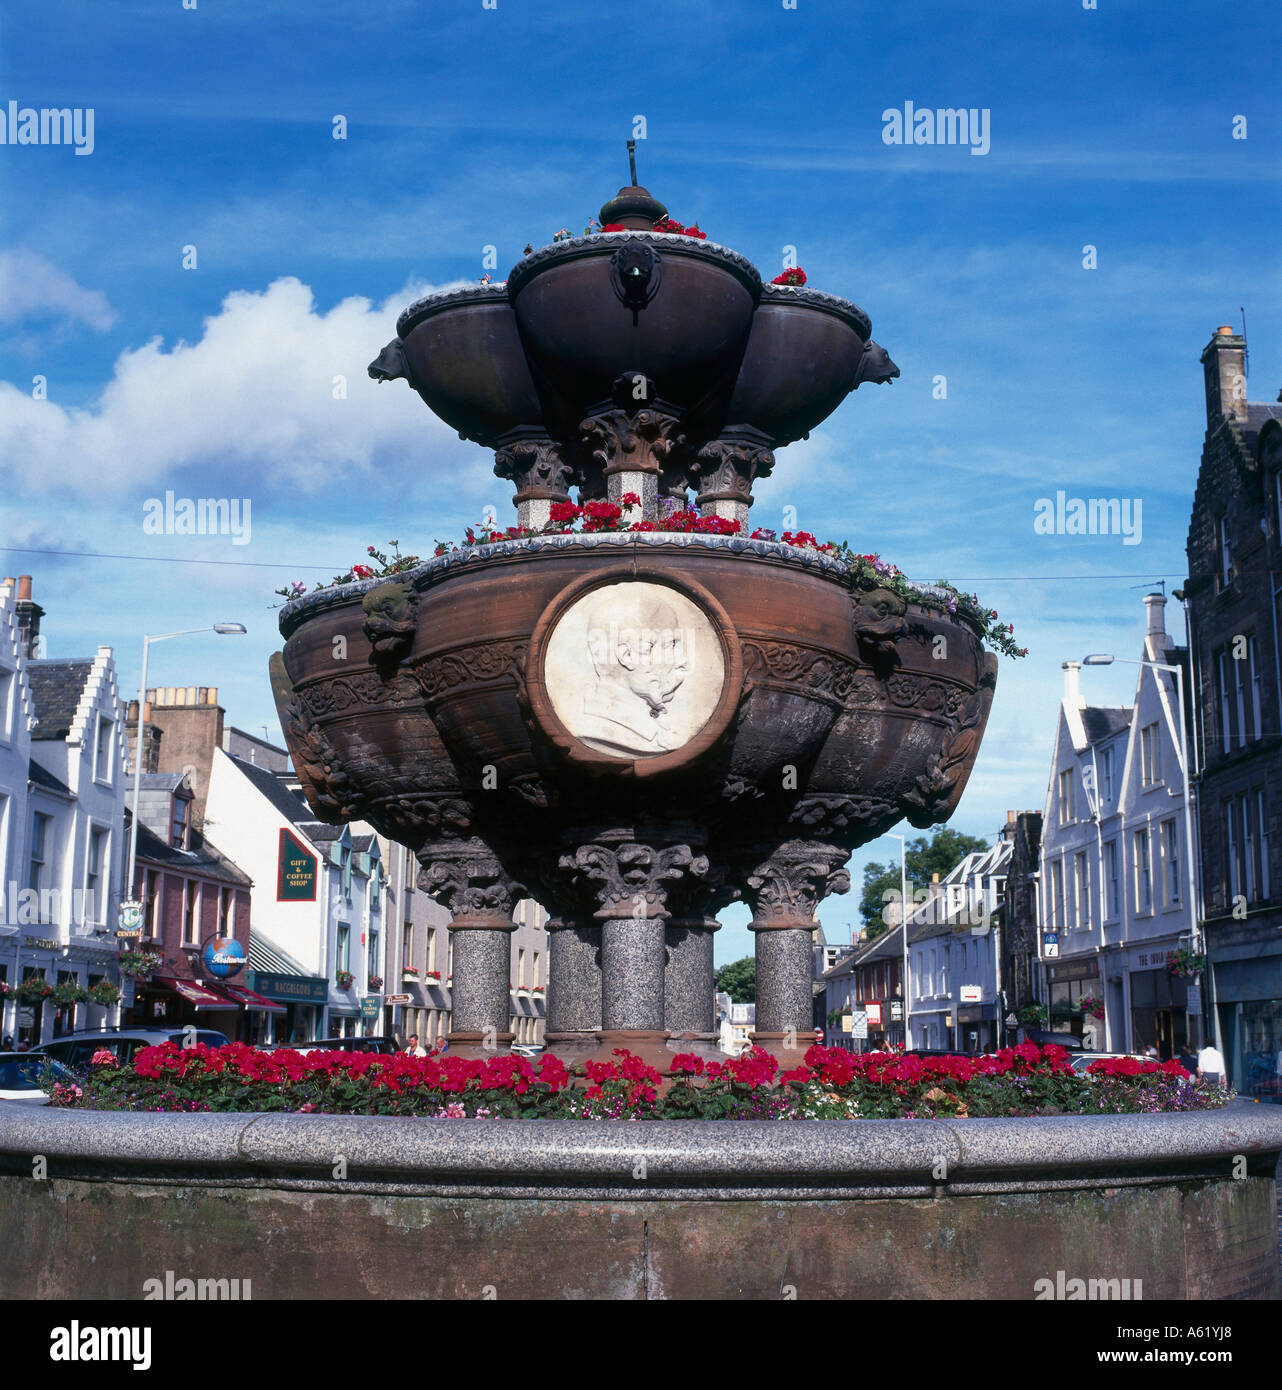 Monument in town, Market Street, St. Andrews, Fife, Scotland Stock Photo